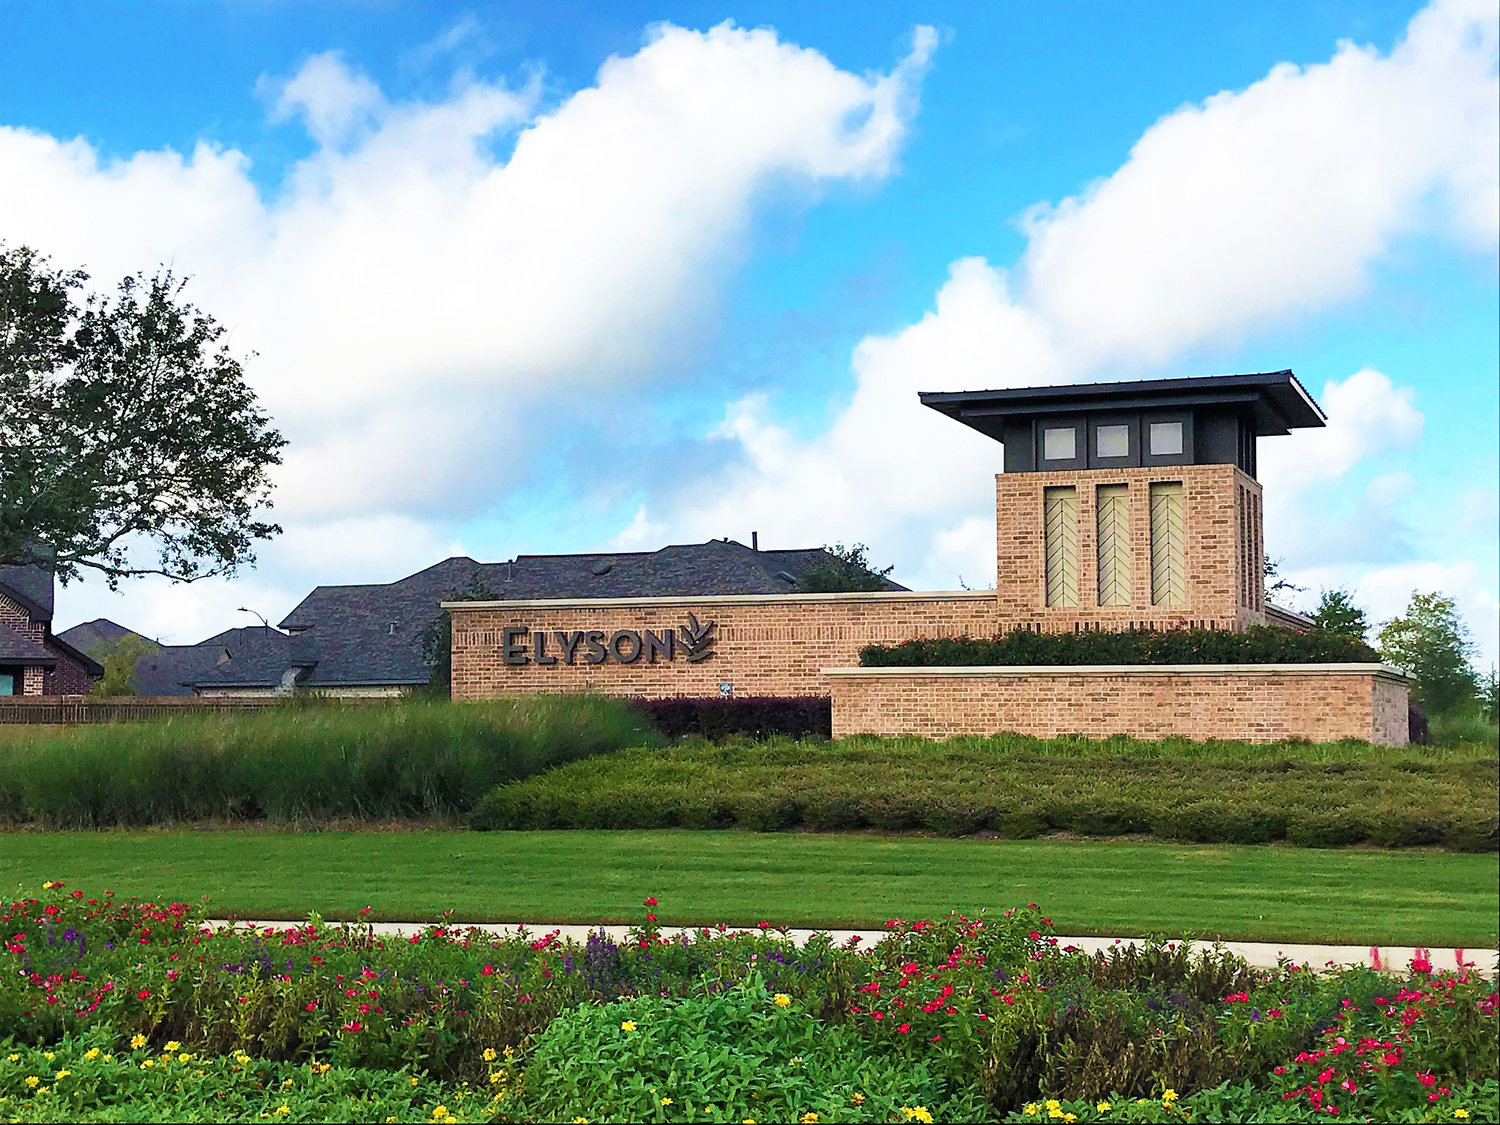 An entry monument marks the entrance to the Elyson masterplanned community.